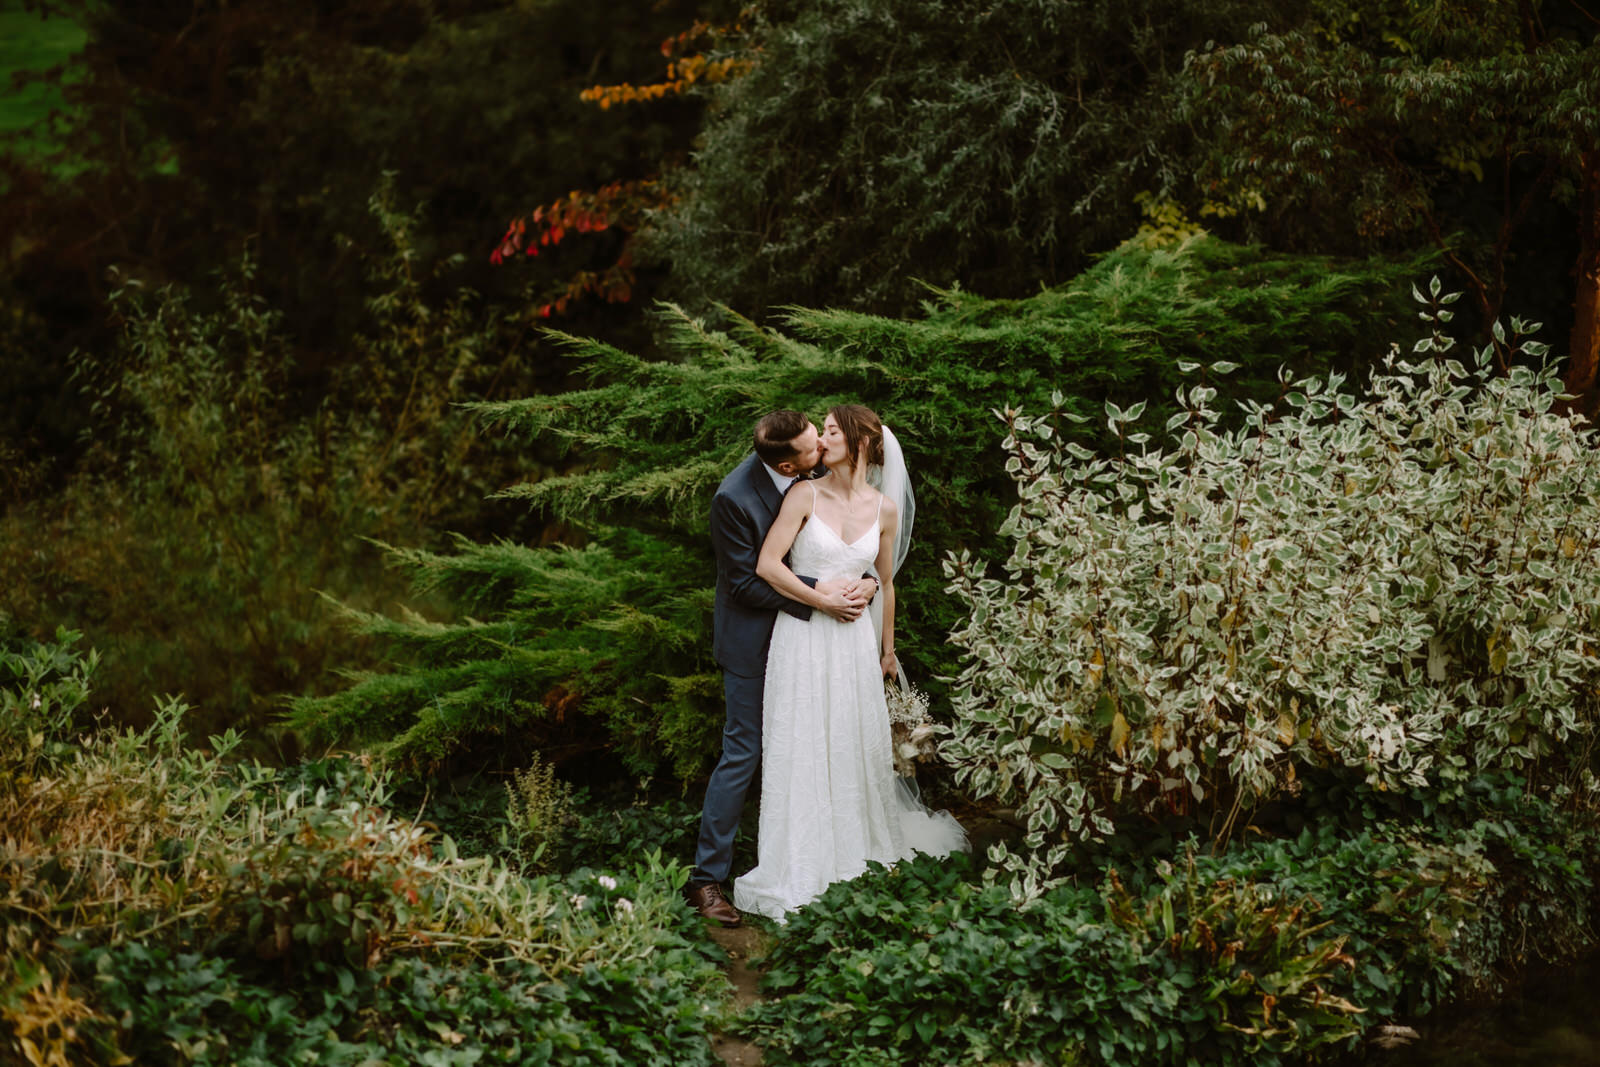 A bride and groom kissing in a garden.